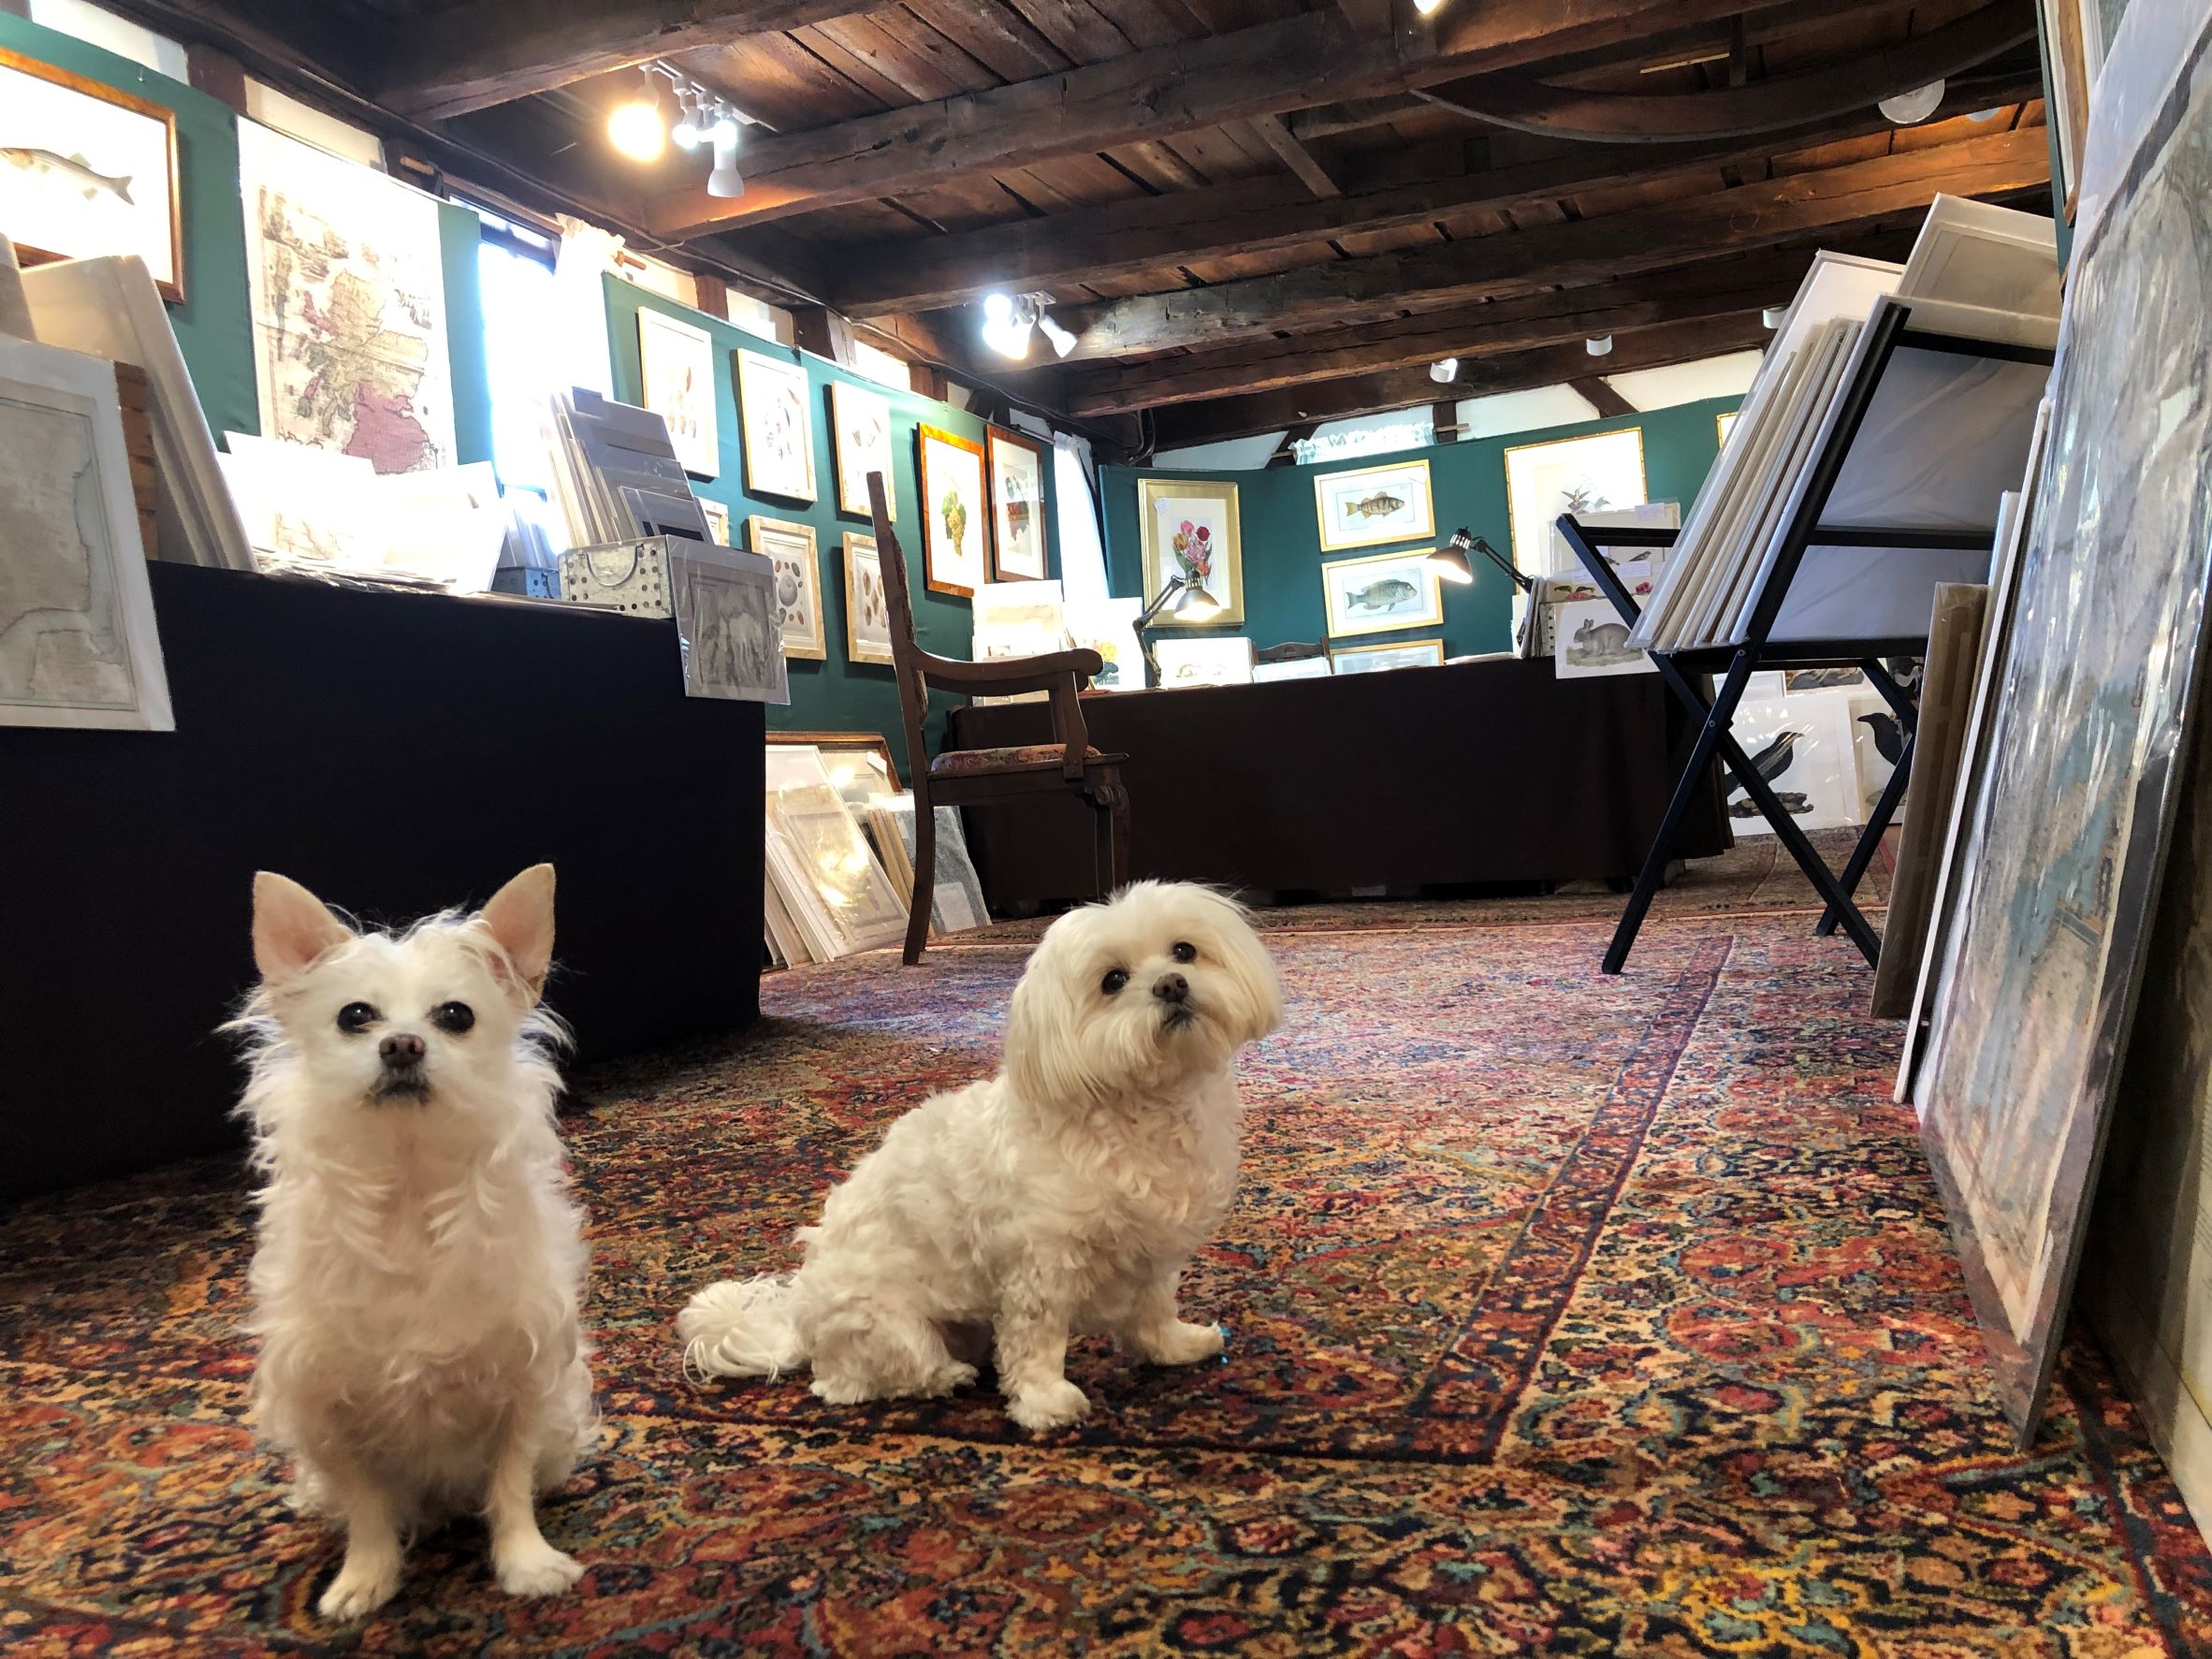 This is Pico and this is Kirby. They are the mascots for, Antique prints Gallery, Bowens Wharf, Newport RI. Find us at the unusual antiques shop, with lots of old maps in a historic c.1760 antique building.